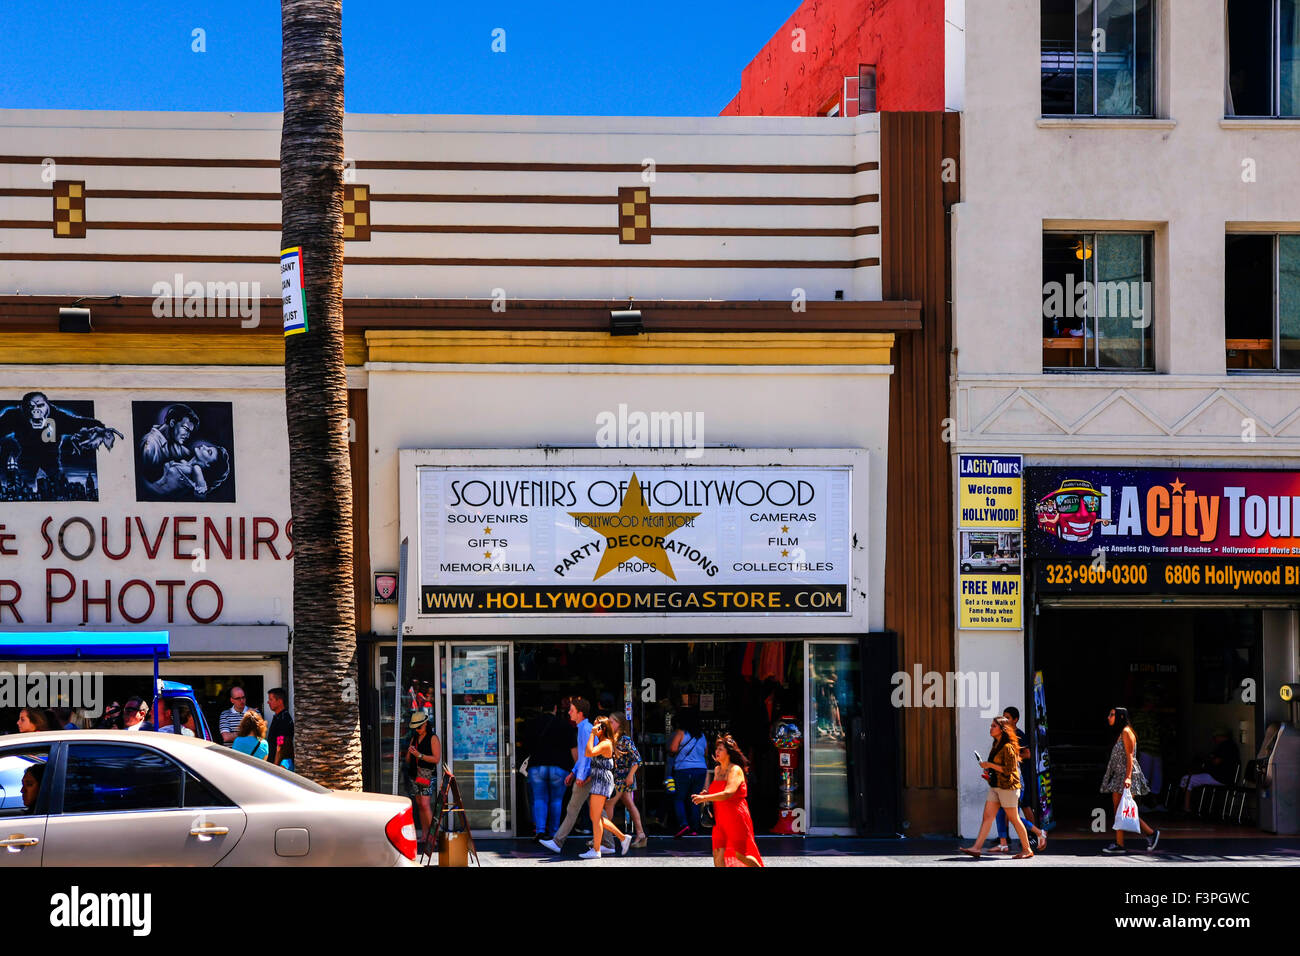 Souvenirs of Hollywood film memorabilia store on Hollywood Blvd and the corner of Highland Ave in downtown Hollywood CA Stock Photo